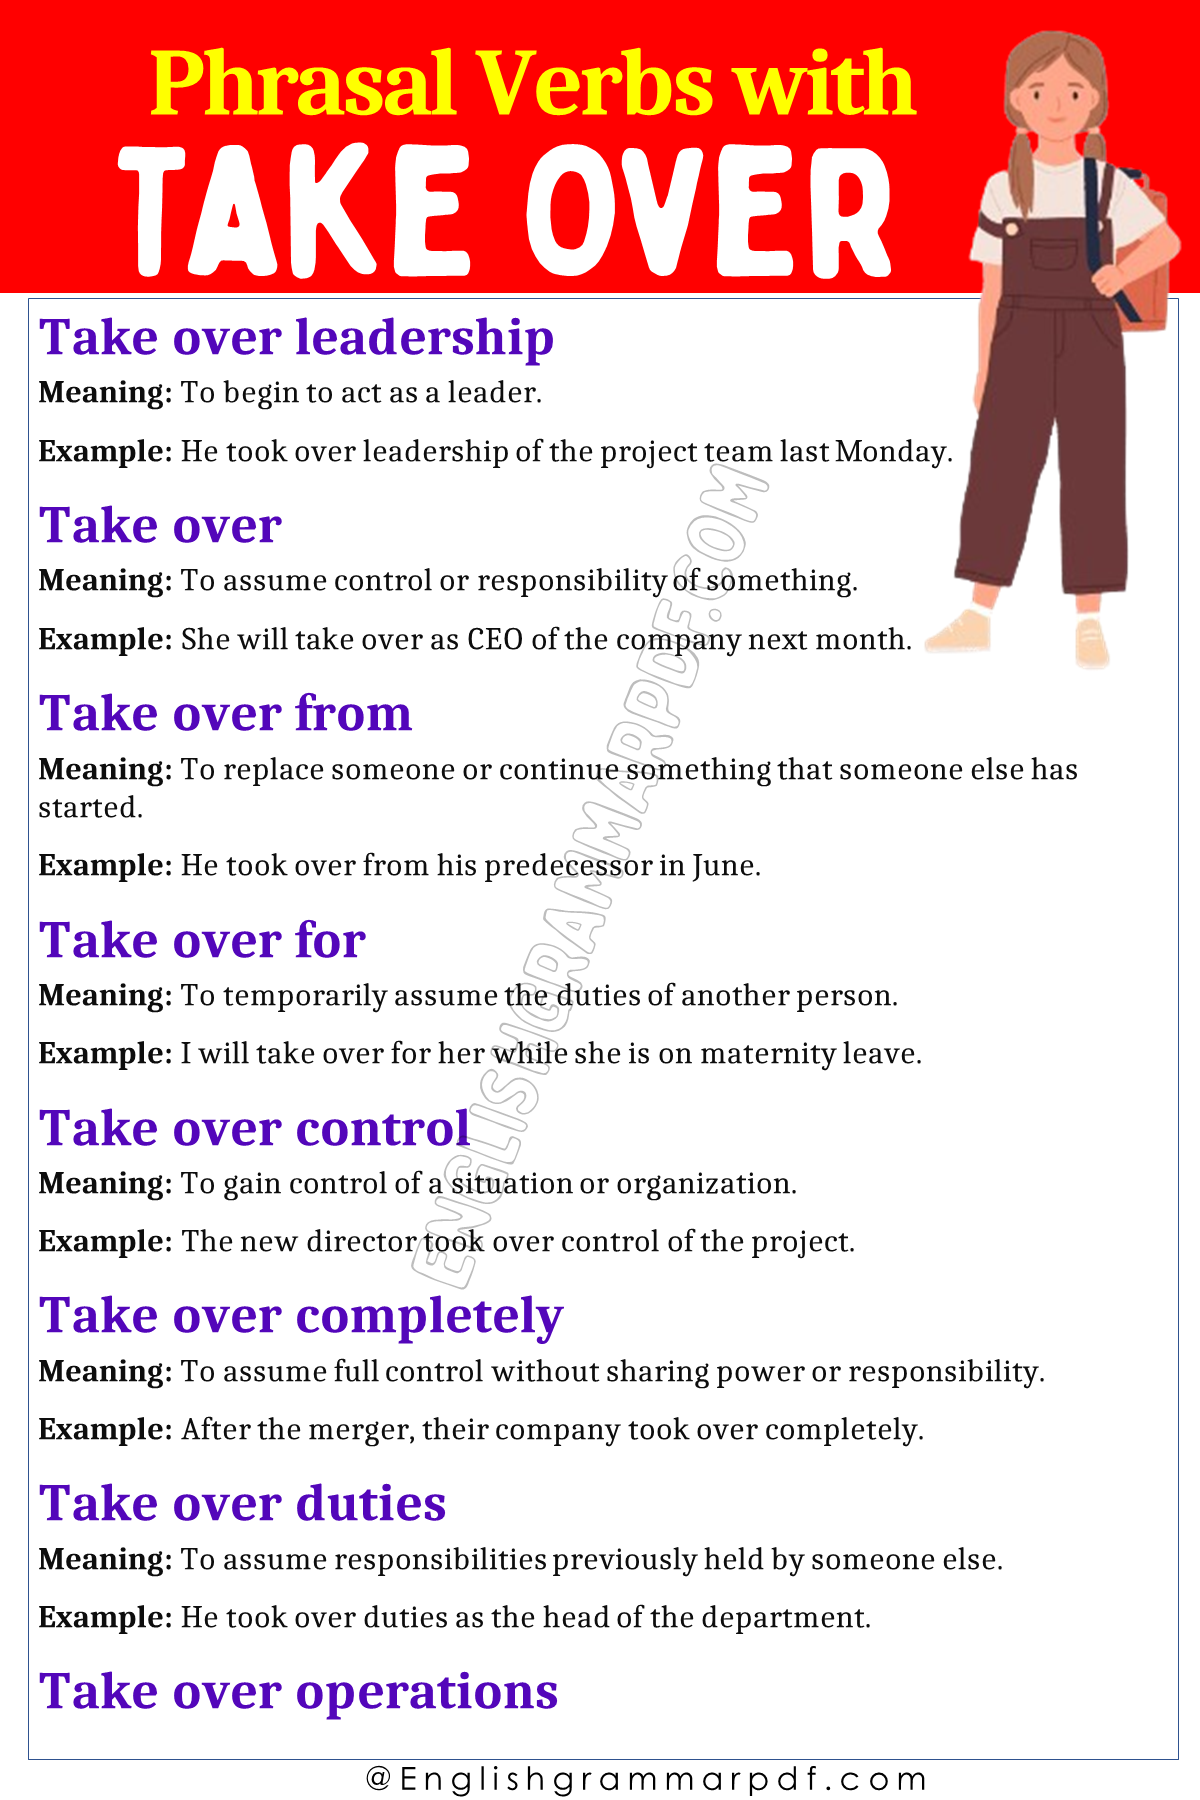 Phrasal Verbs with Take Over